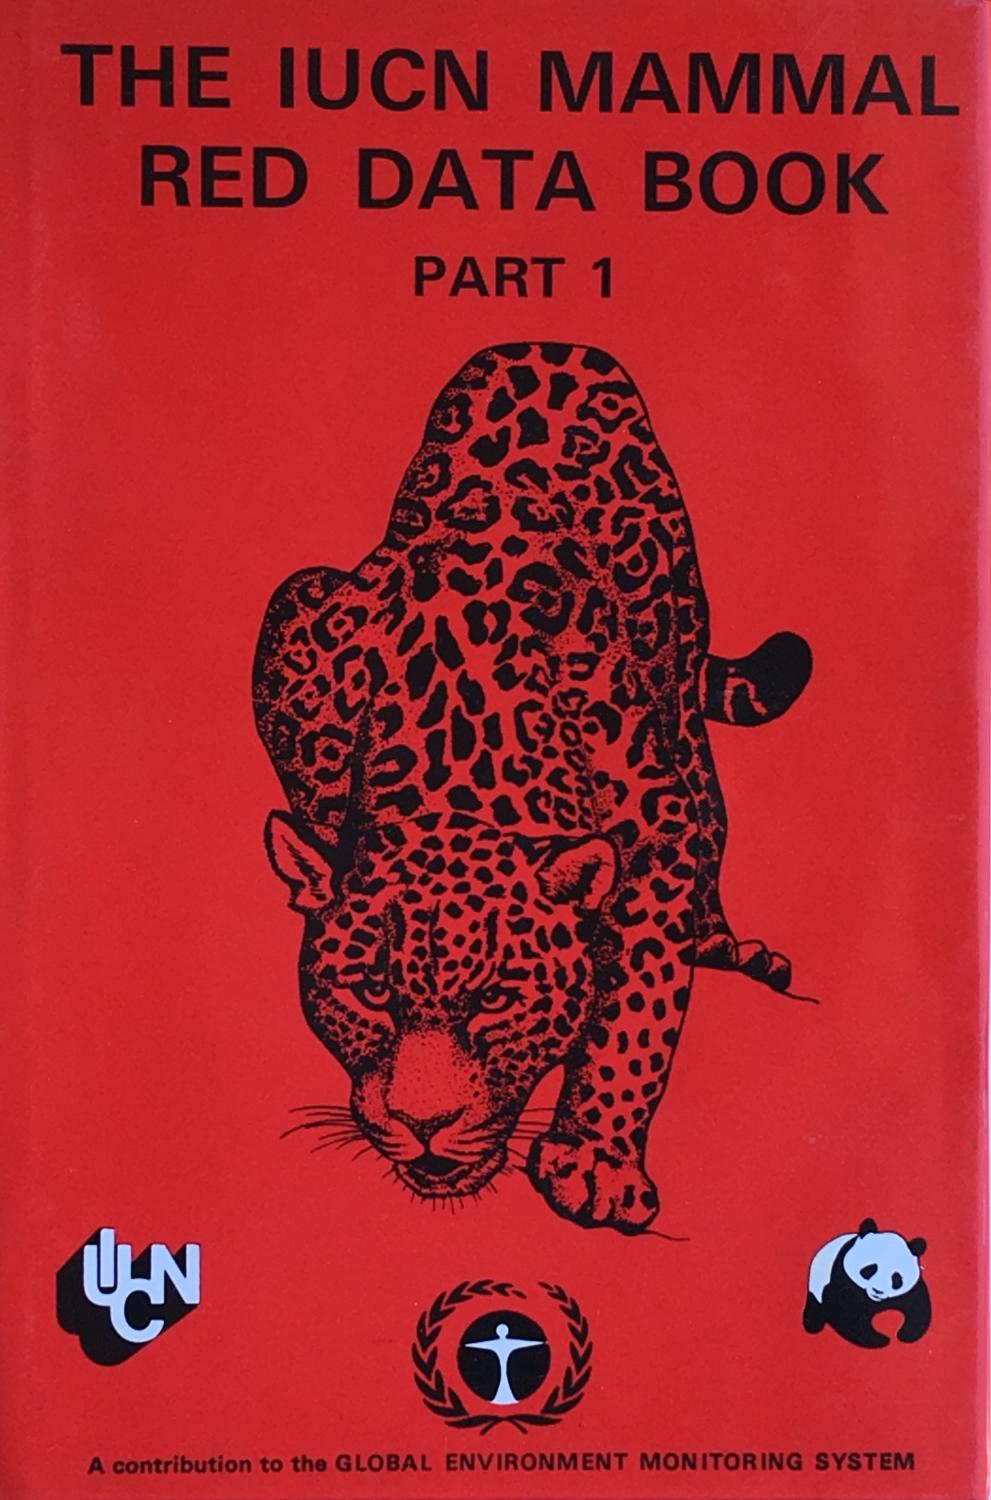 The IUCN Mammal red data book part 1 by Thornback, J. & Jenkins, M.: .  Hard covers, no dust jacket (1982) 1st edition. | Acanthophyllum Books